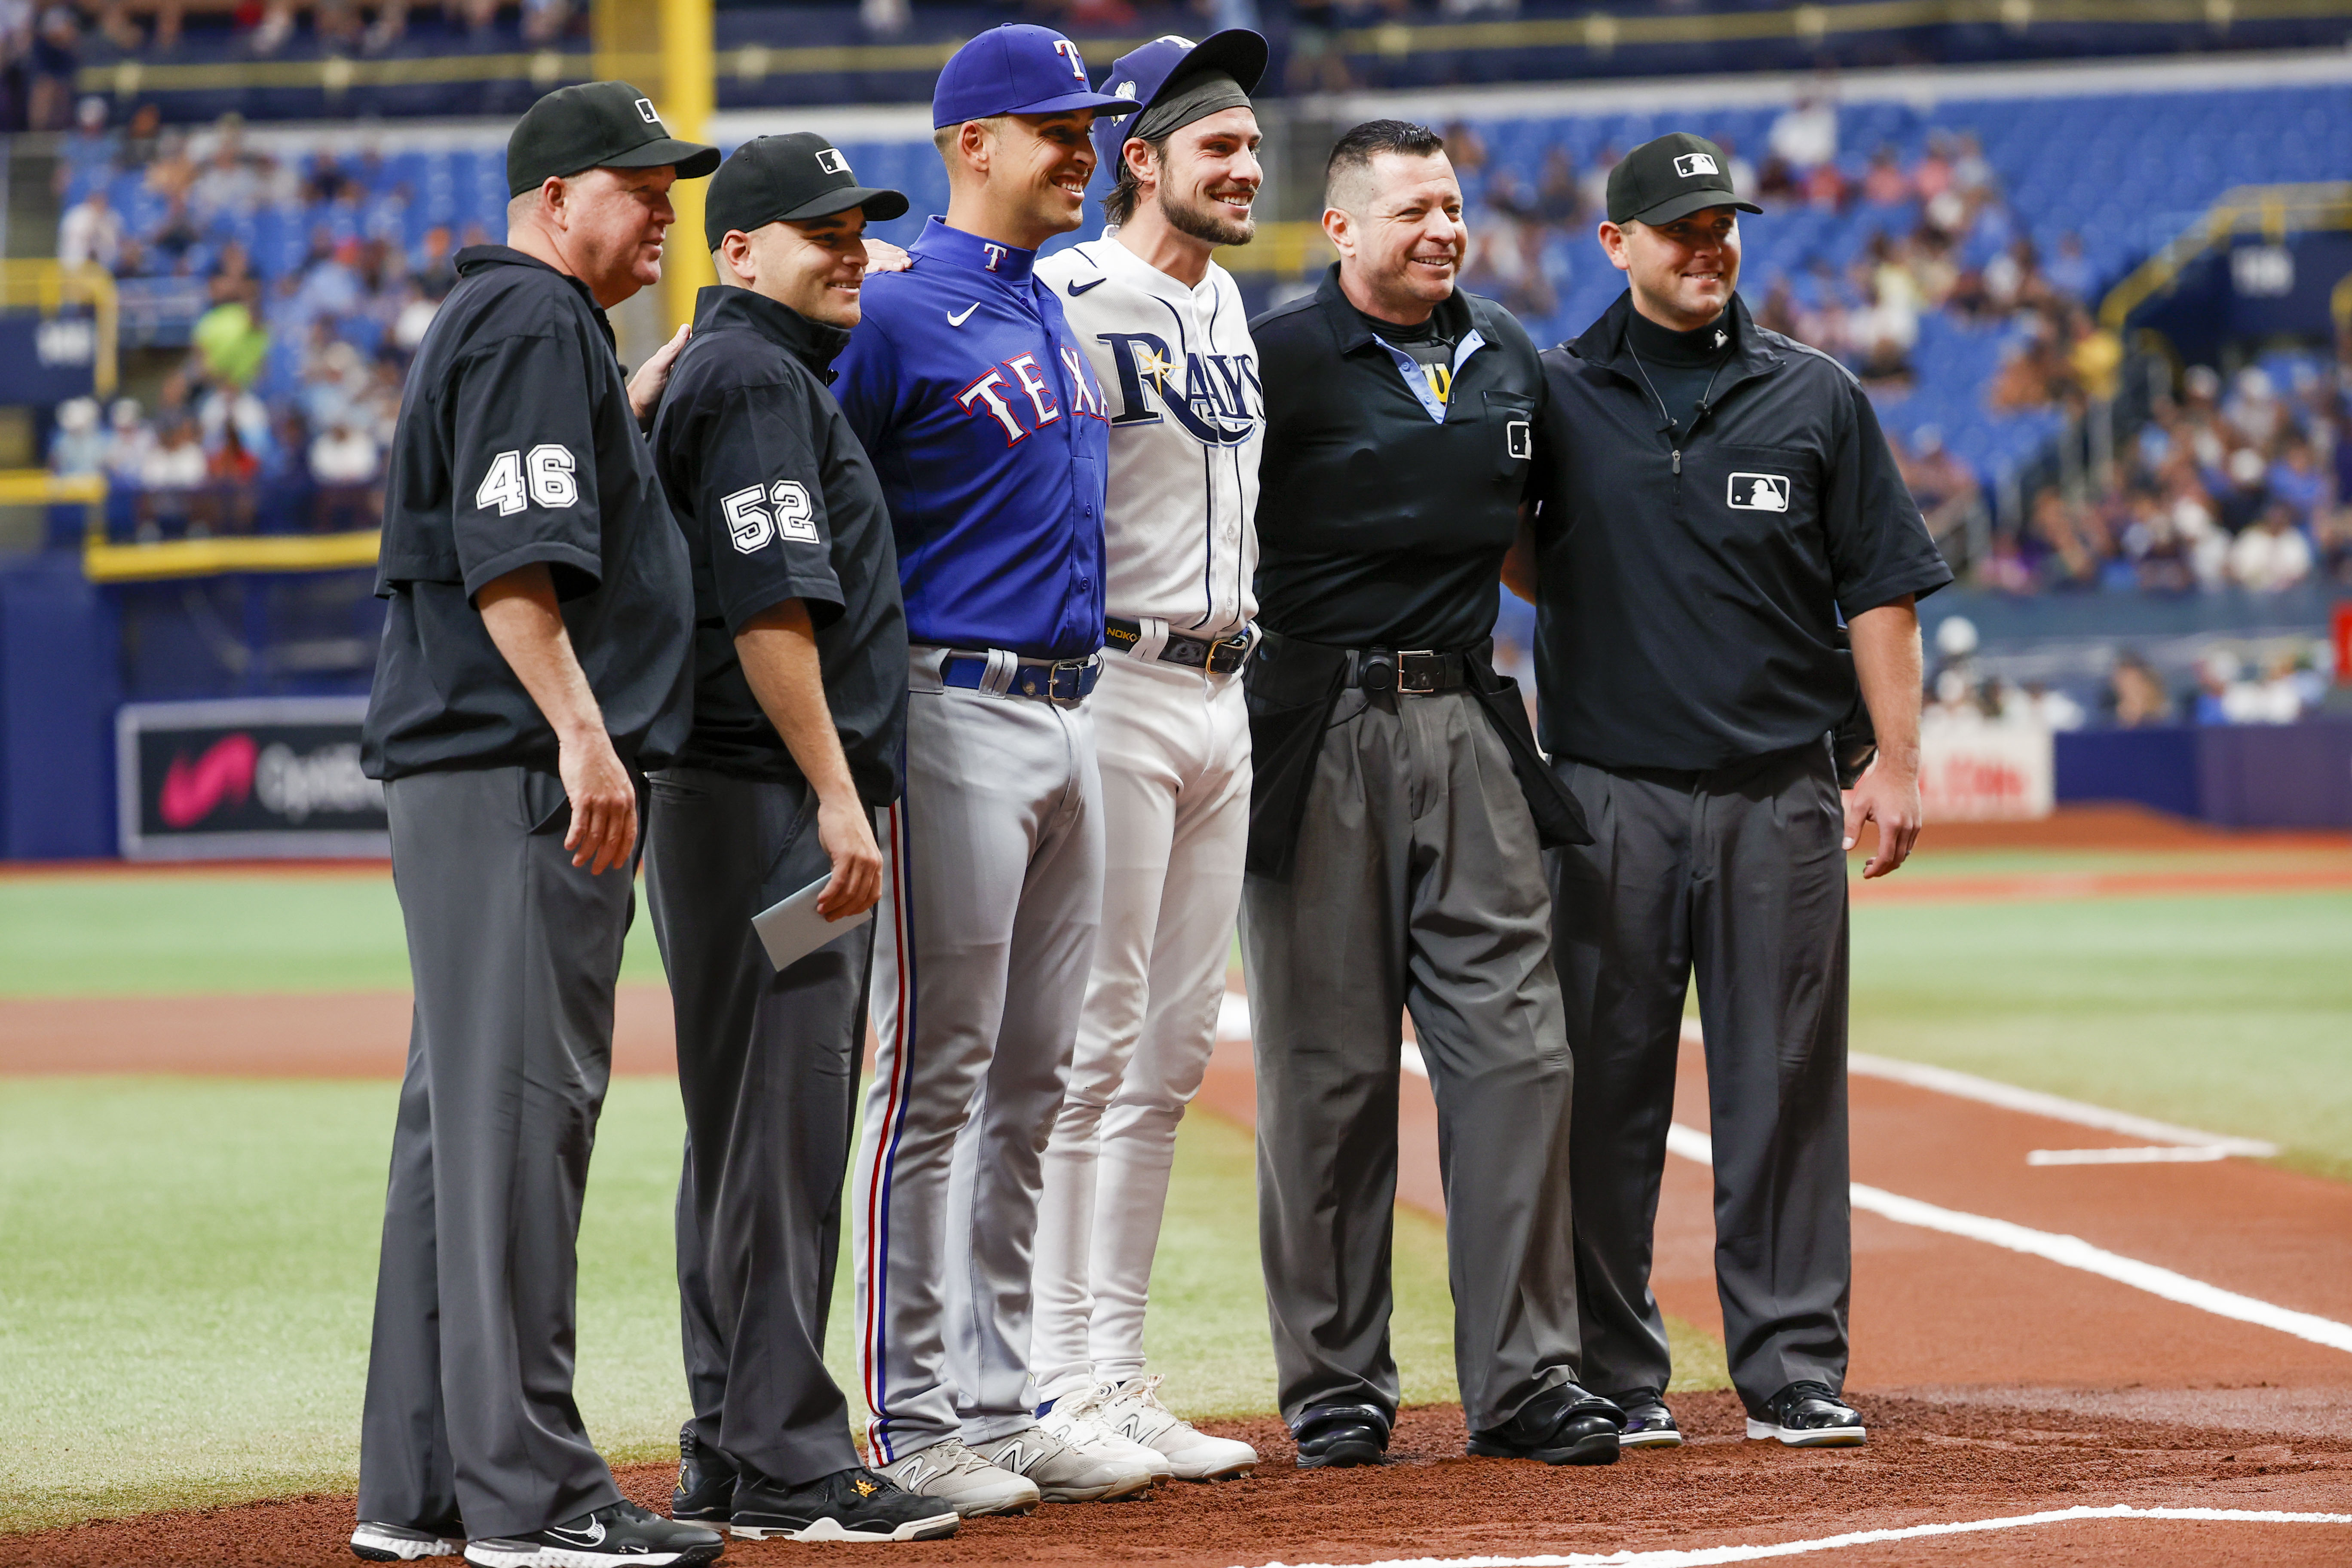 In Rangers-Rays series, brothers Nathaniel, Josh Lowe have minds